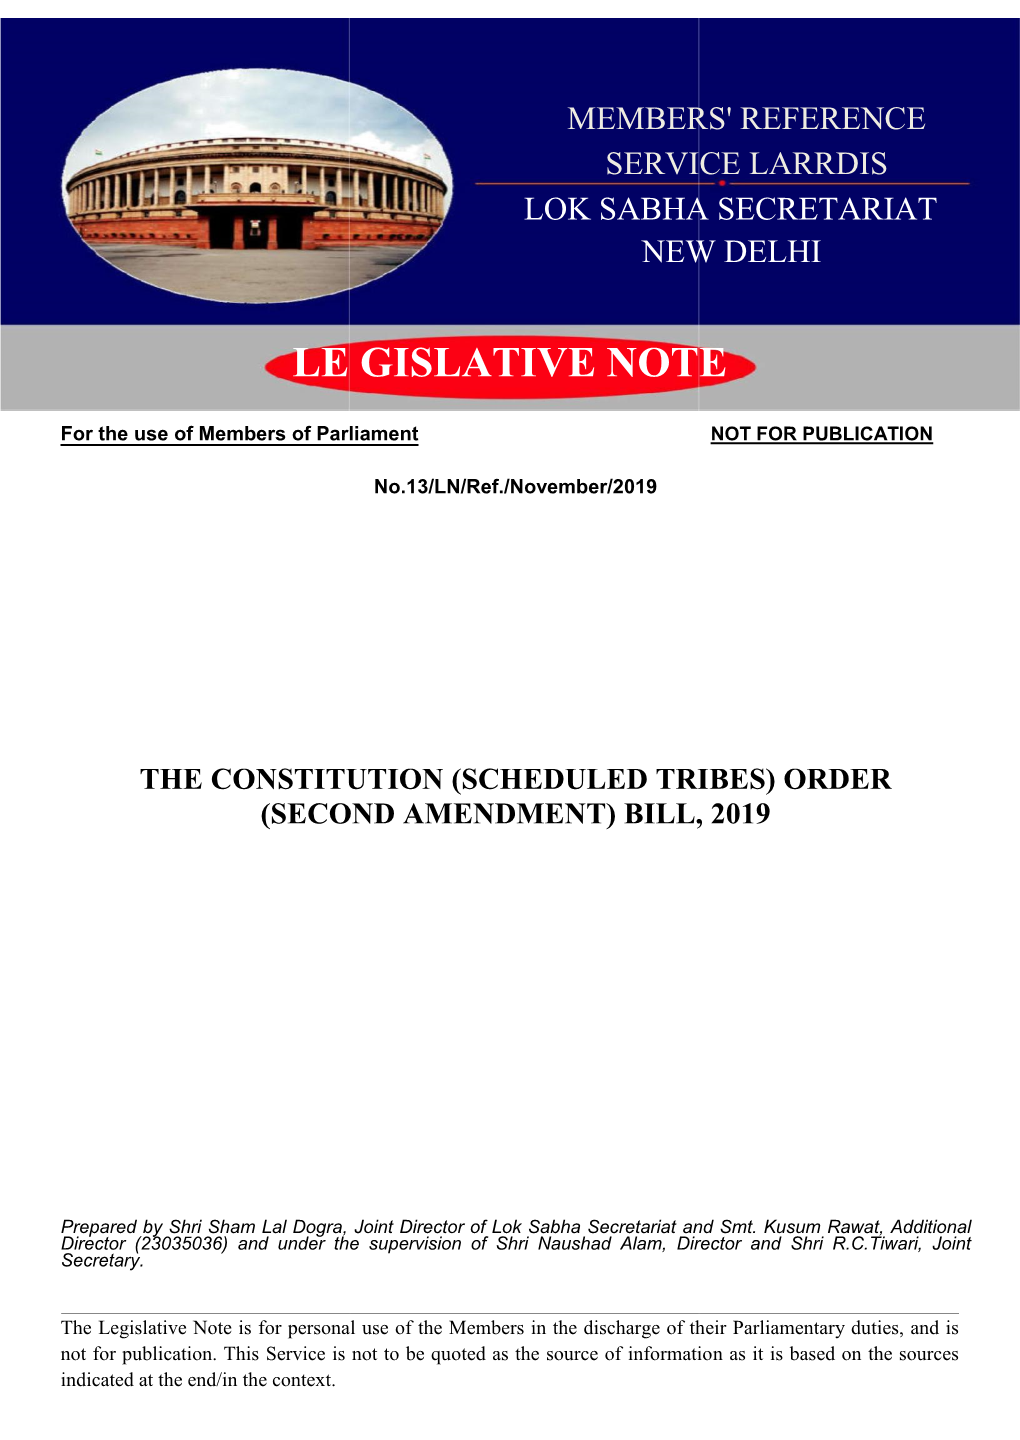 The Constitution (Scheduled Tribes) Order (Second Amendment) Bill, 2019